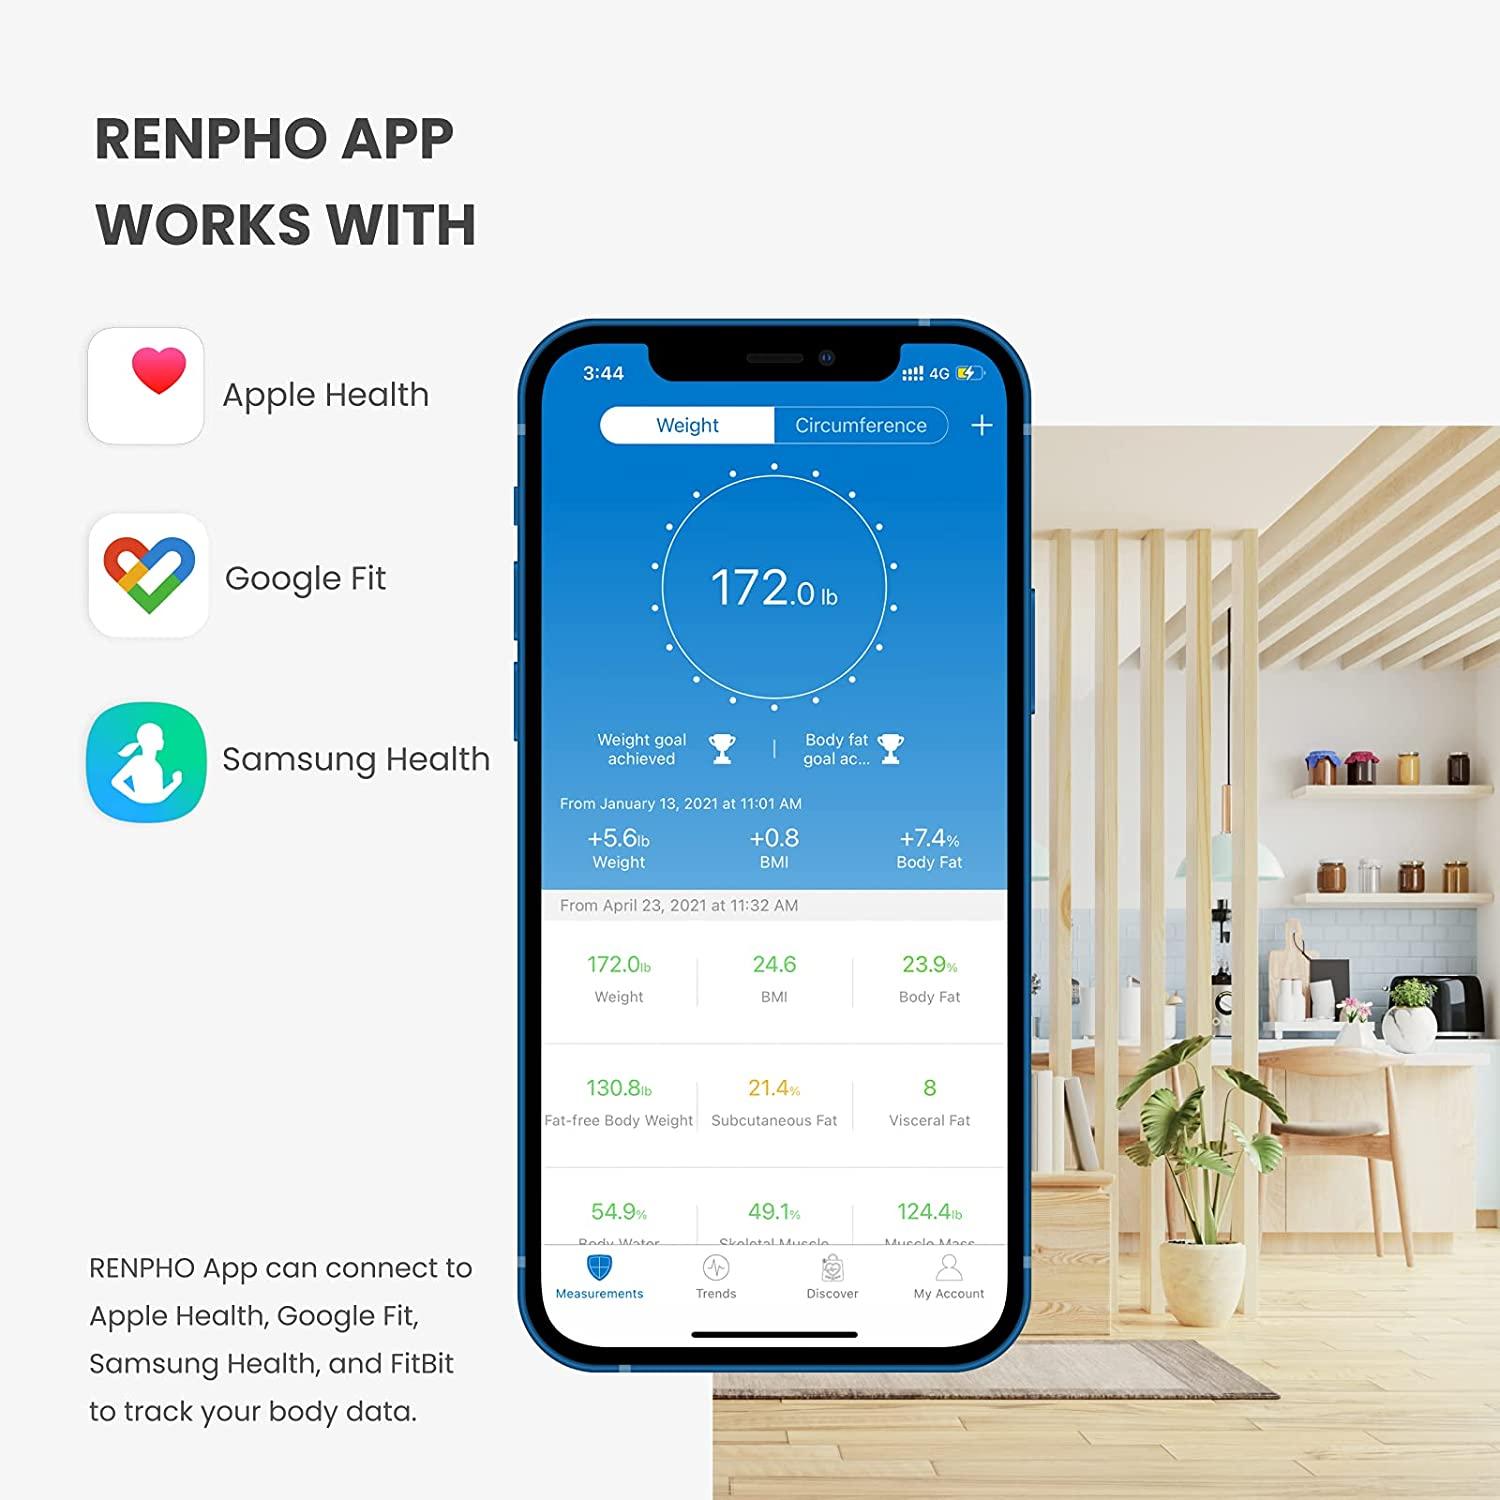 RENPHO Smart Scale Review and RENPHO Smart Tape Measure Review